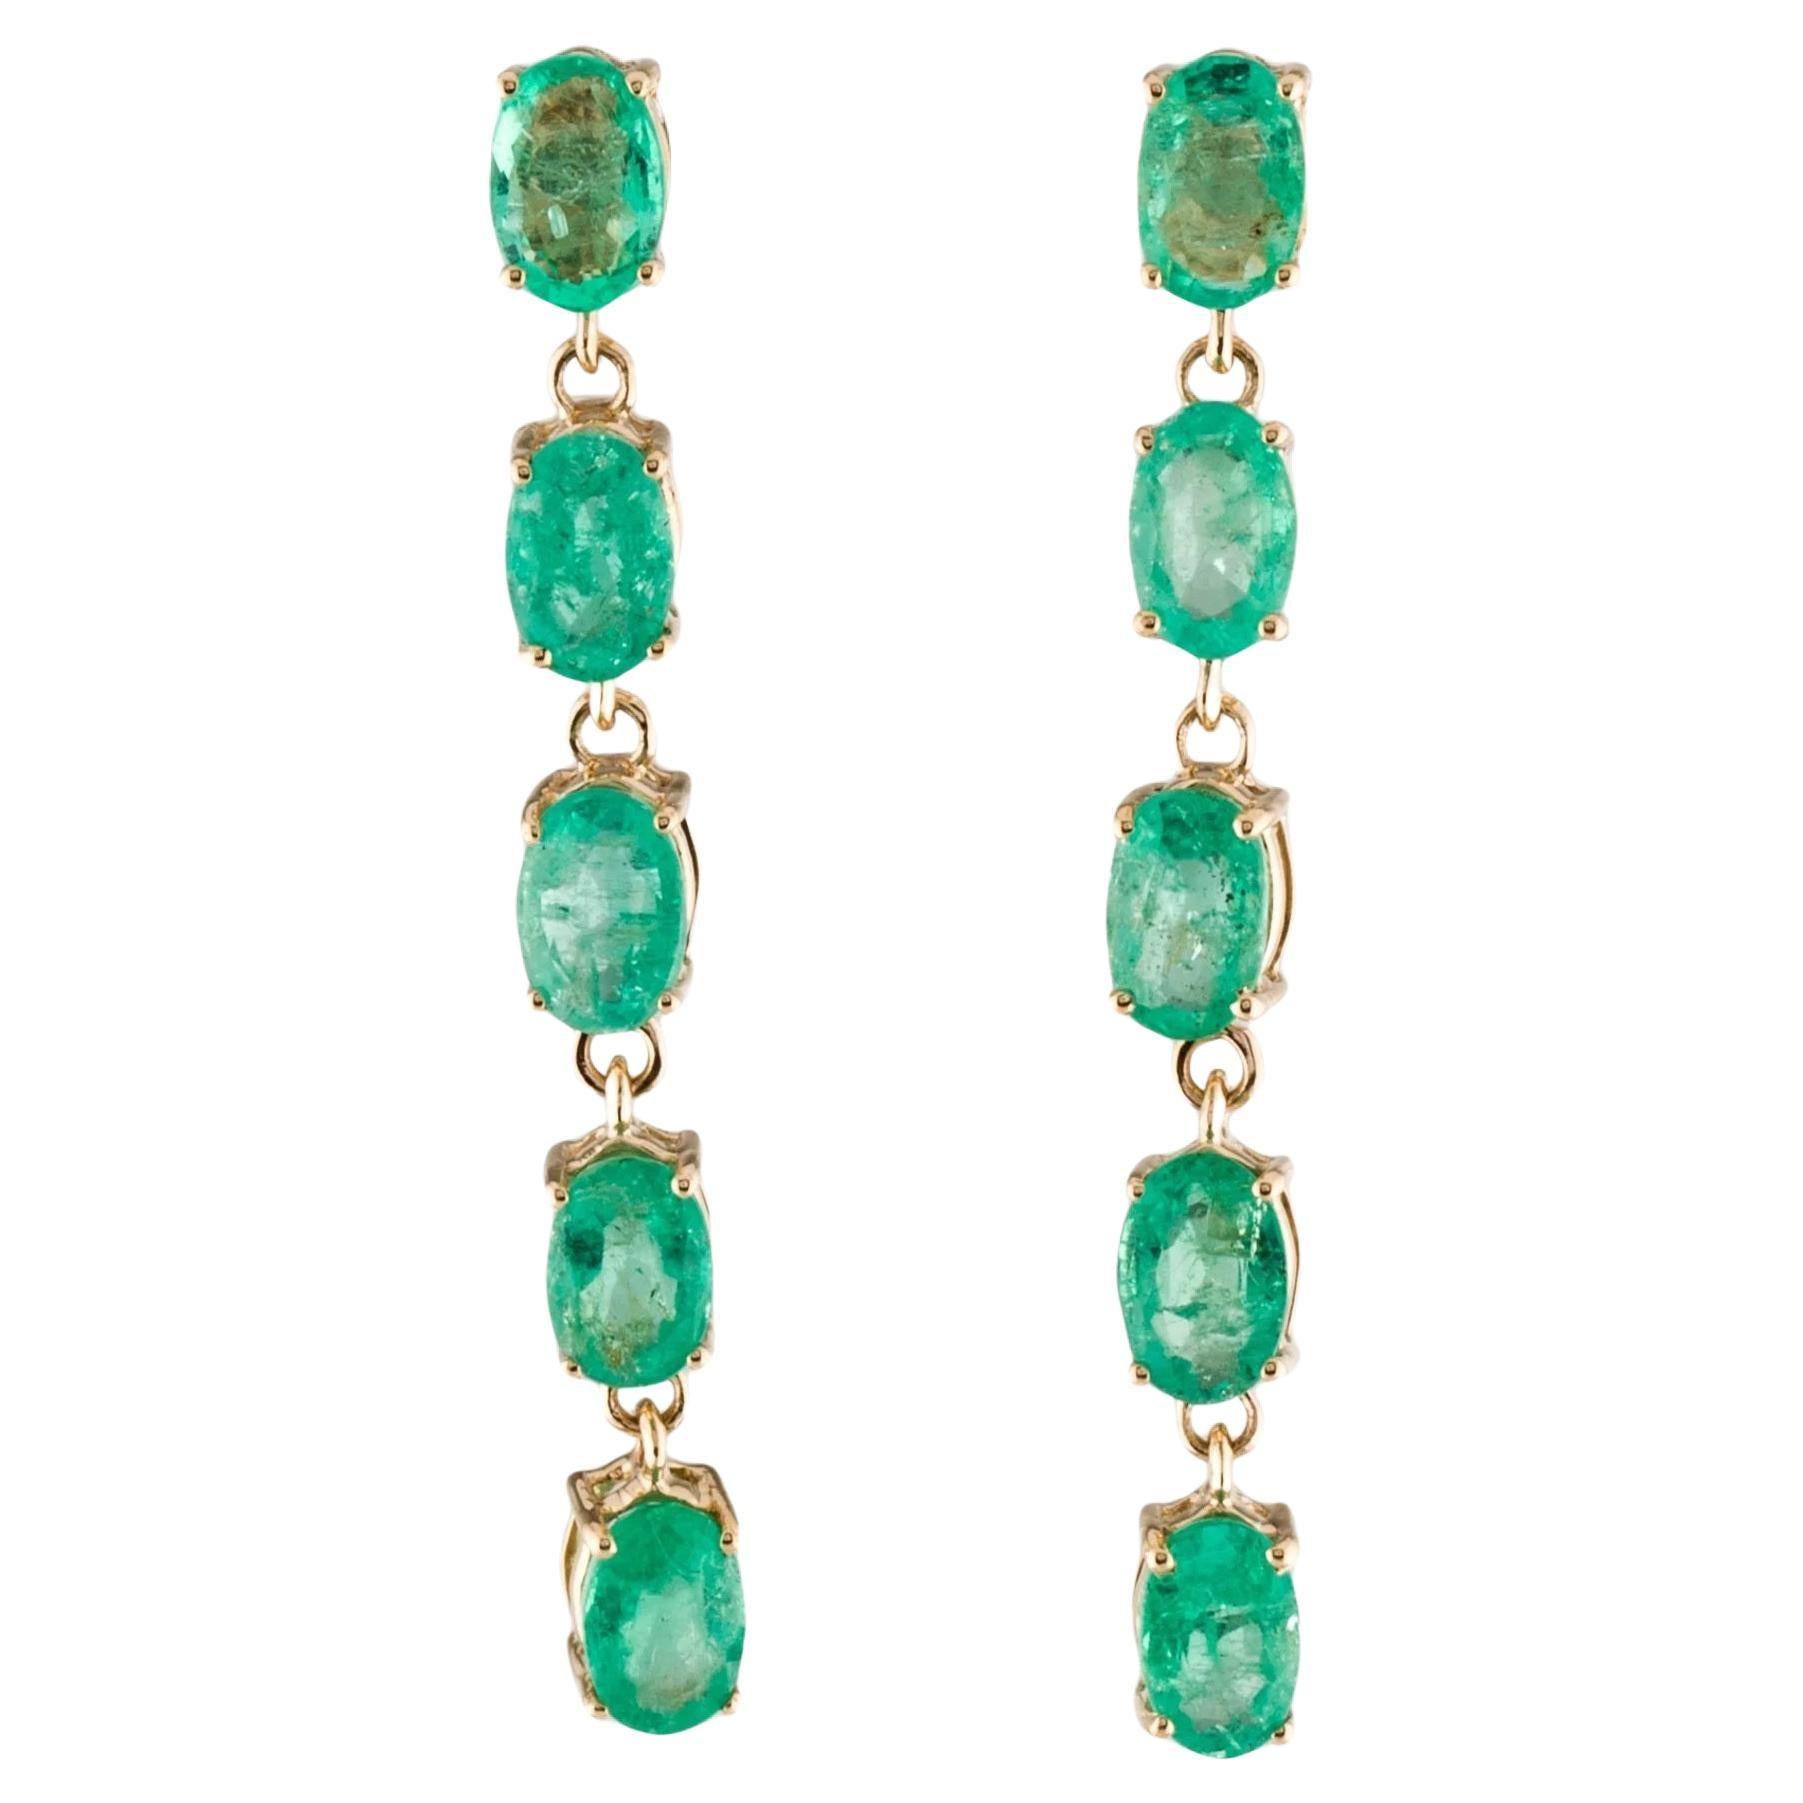 14K Gold Earrings with 5.08 Ct Oval Emeralds - Luxurious & Elegant